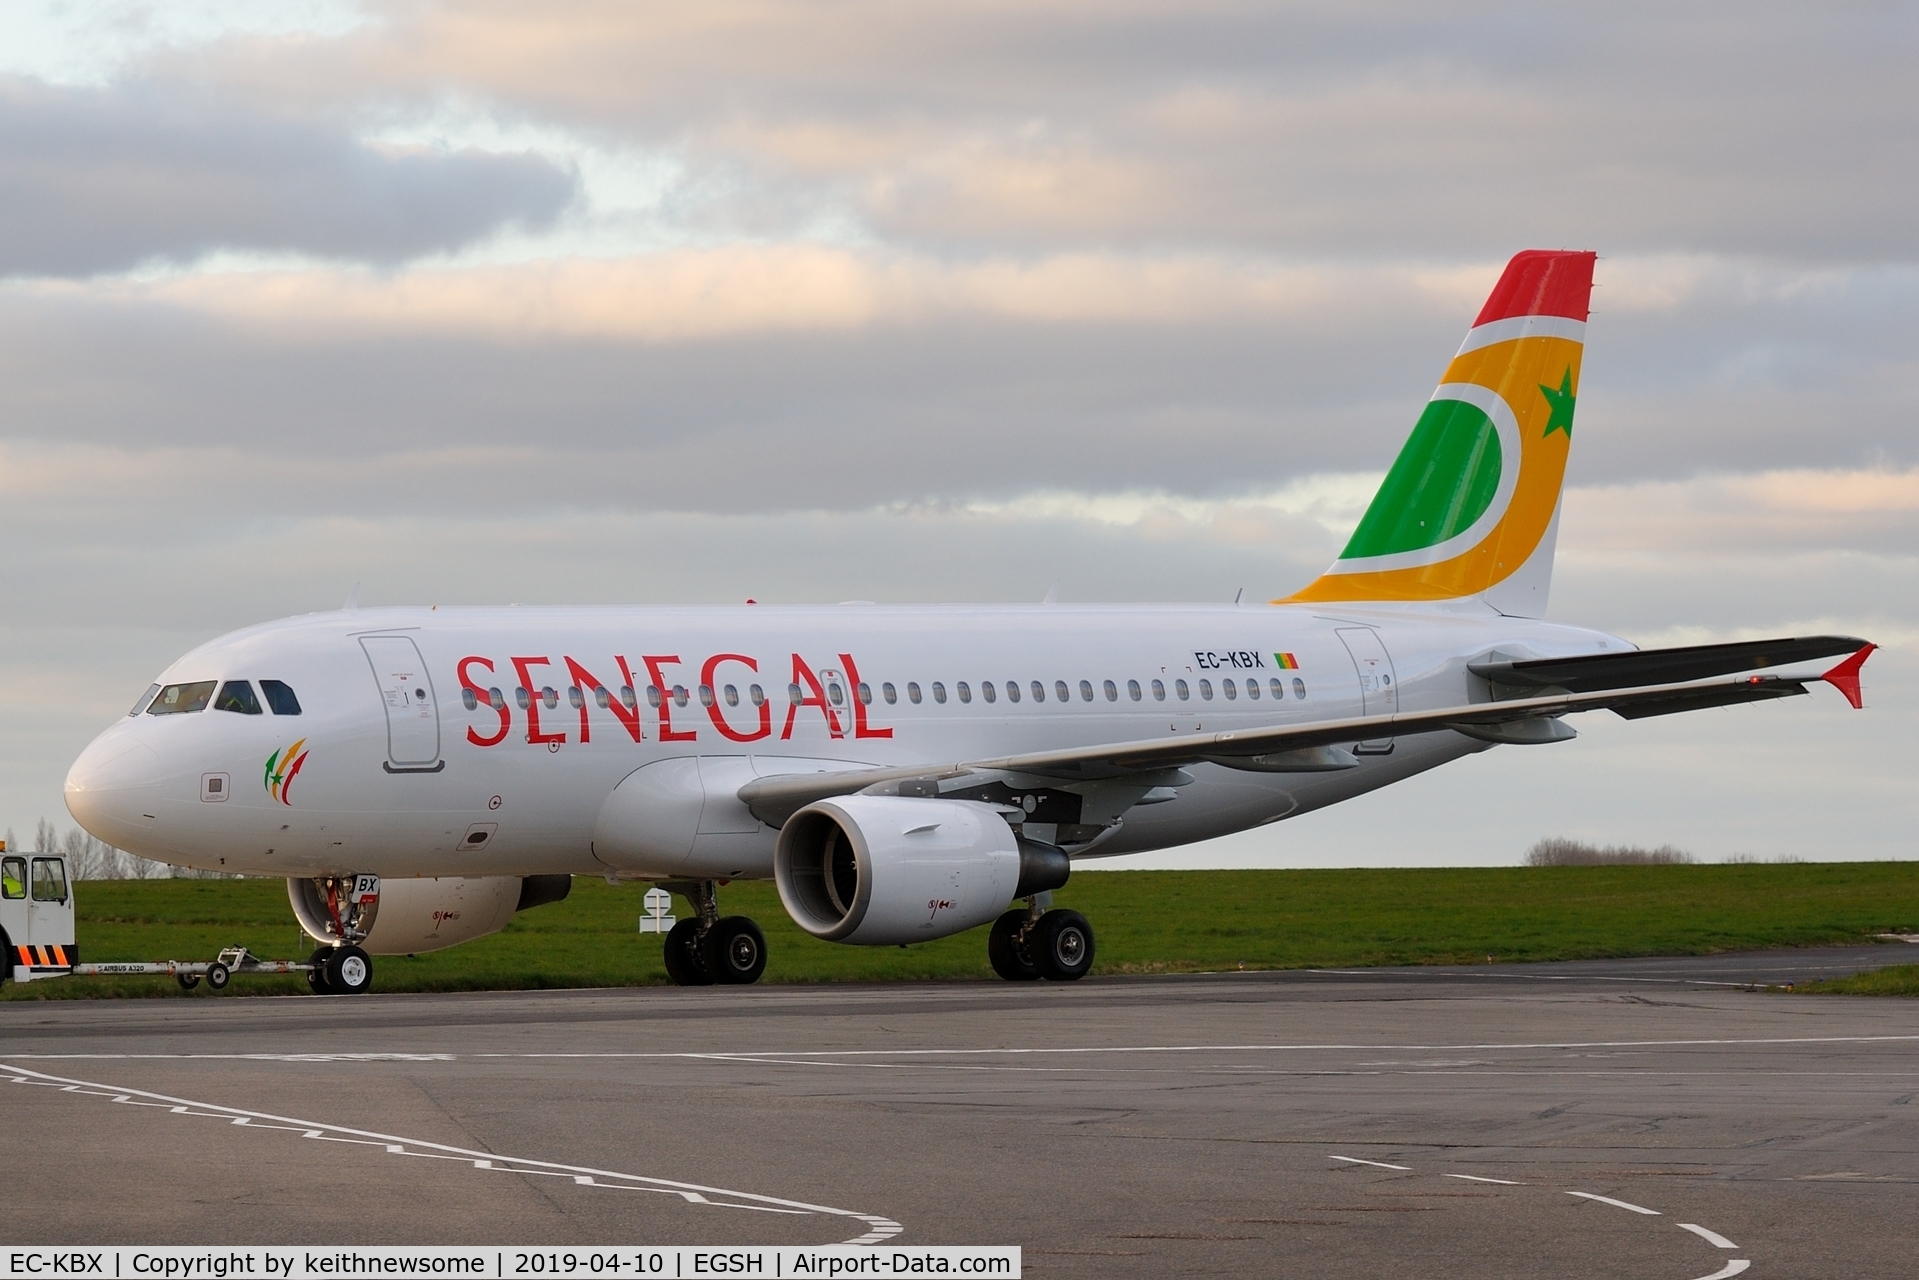 EC-KBX, 2007 Airbus A319-111 C/N 3078, Removed from spray shop to become 6V-AMB with new AirSenegal.